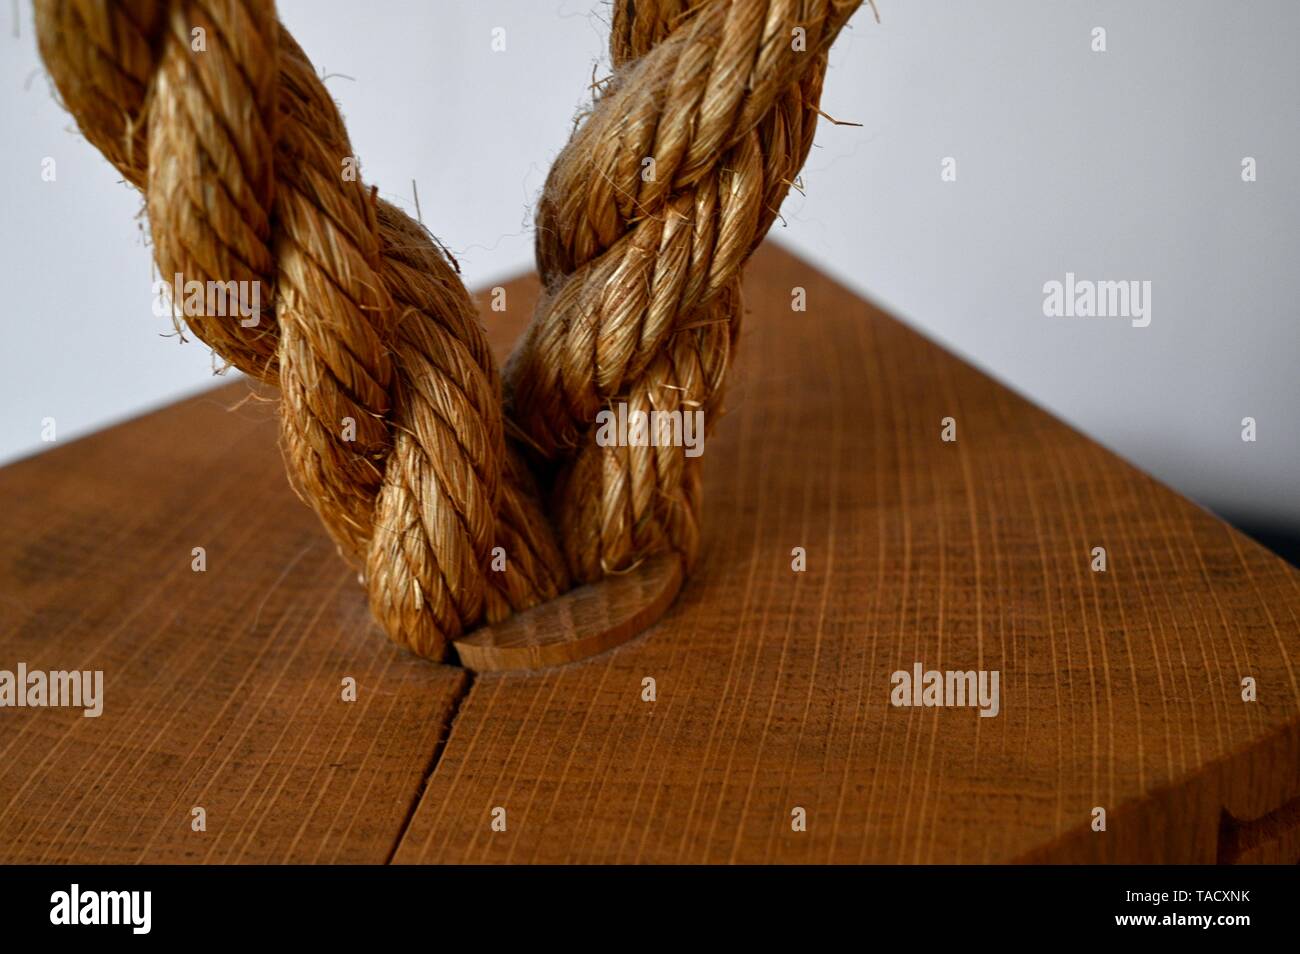 A highly textured loop of fishing rope set in a wooden buoy or floatation device on a light interior. Stock Photo